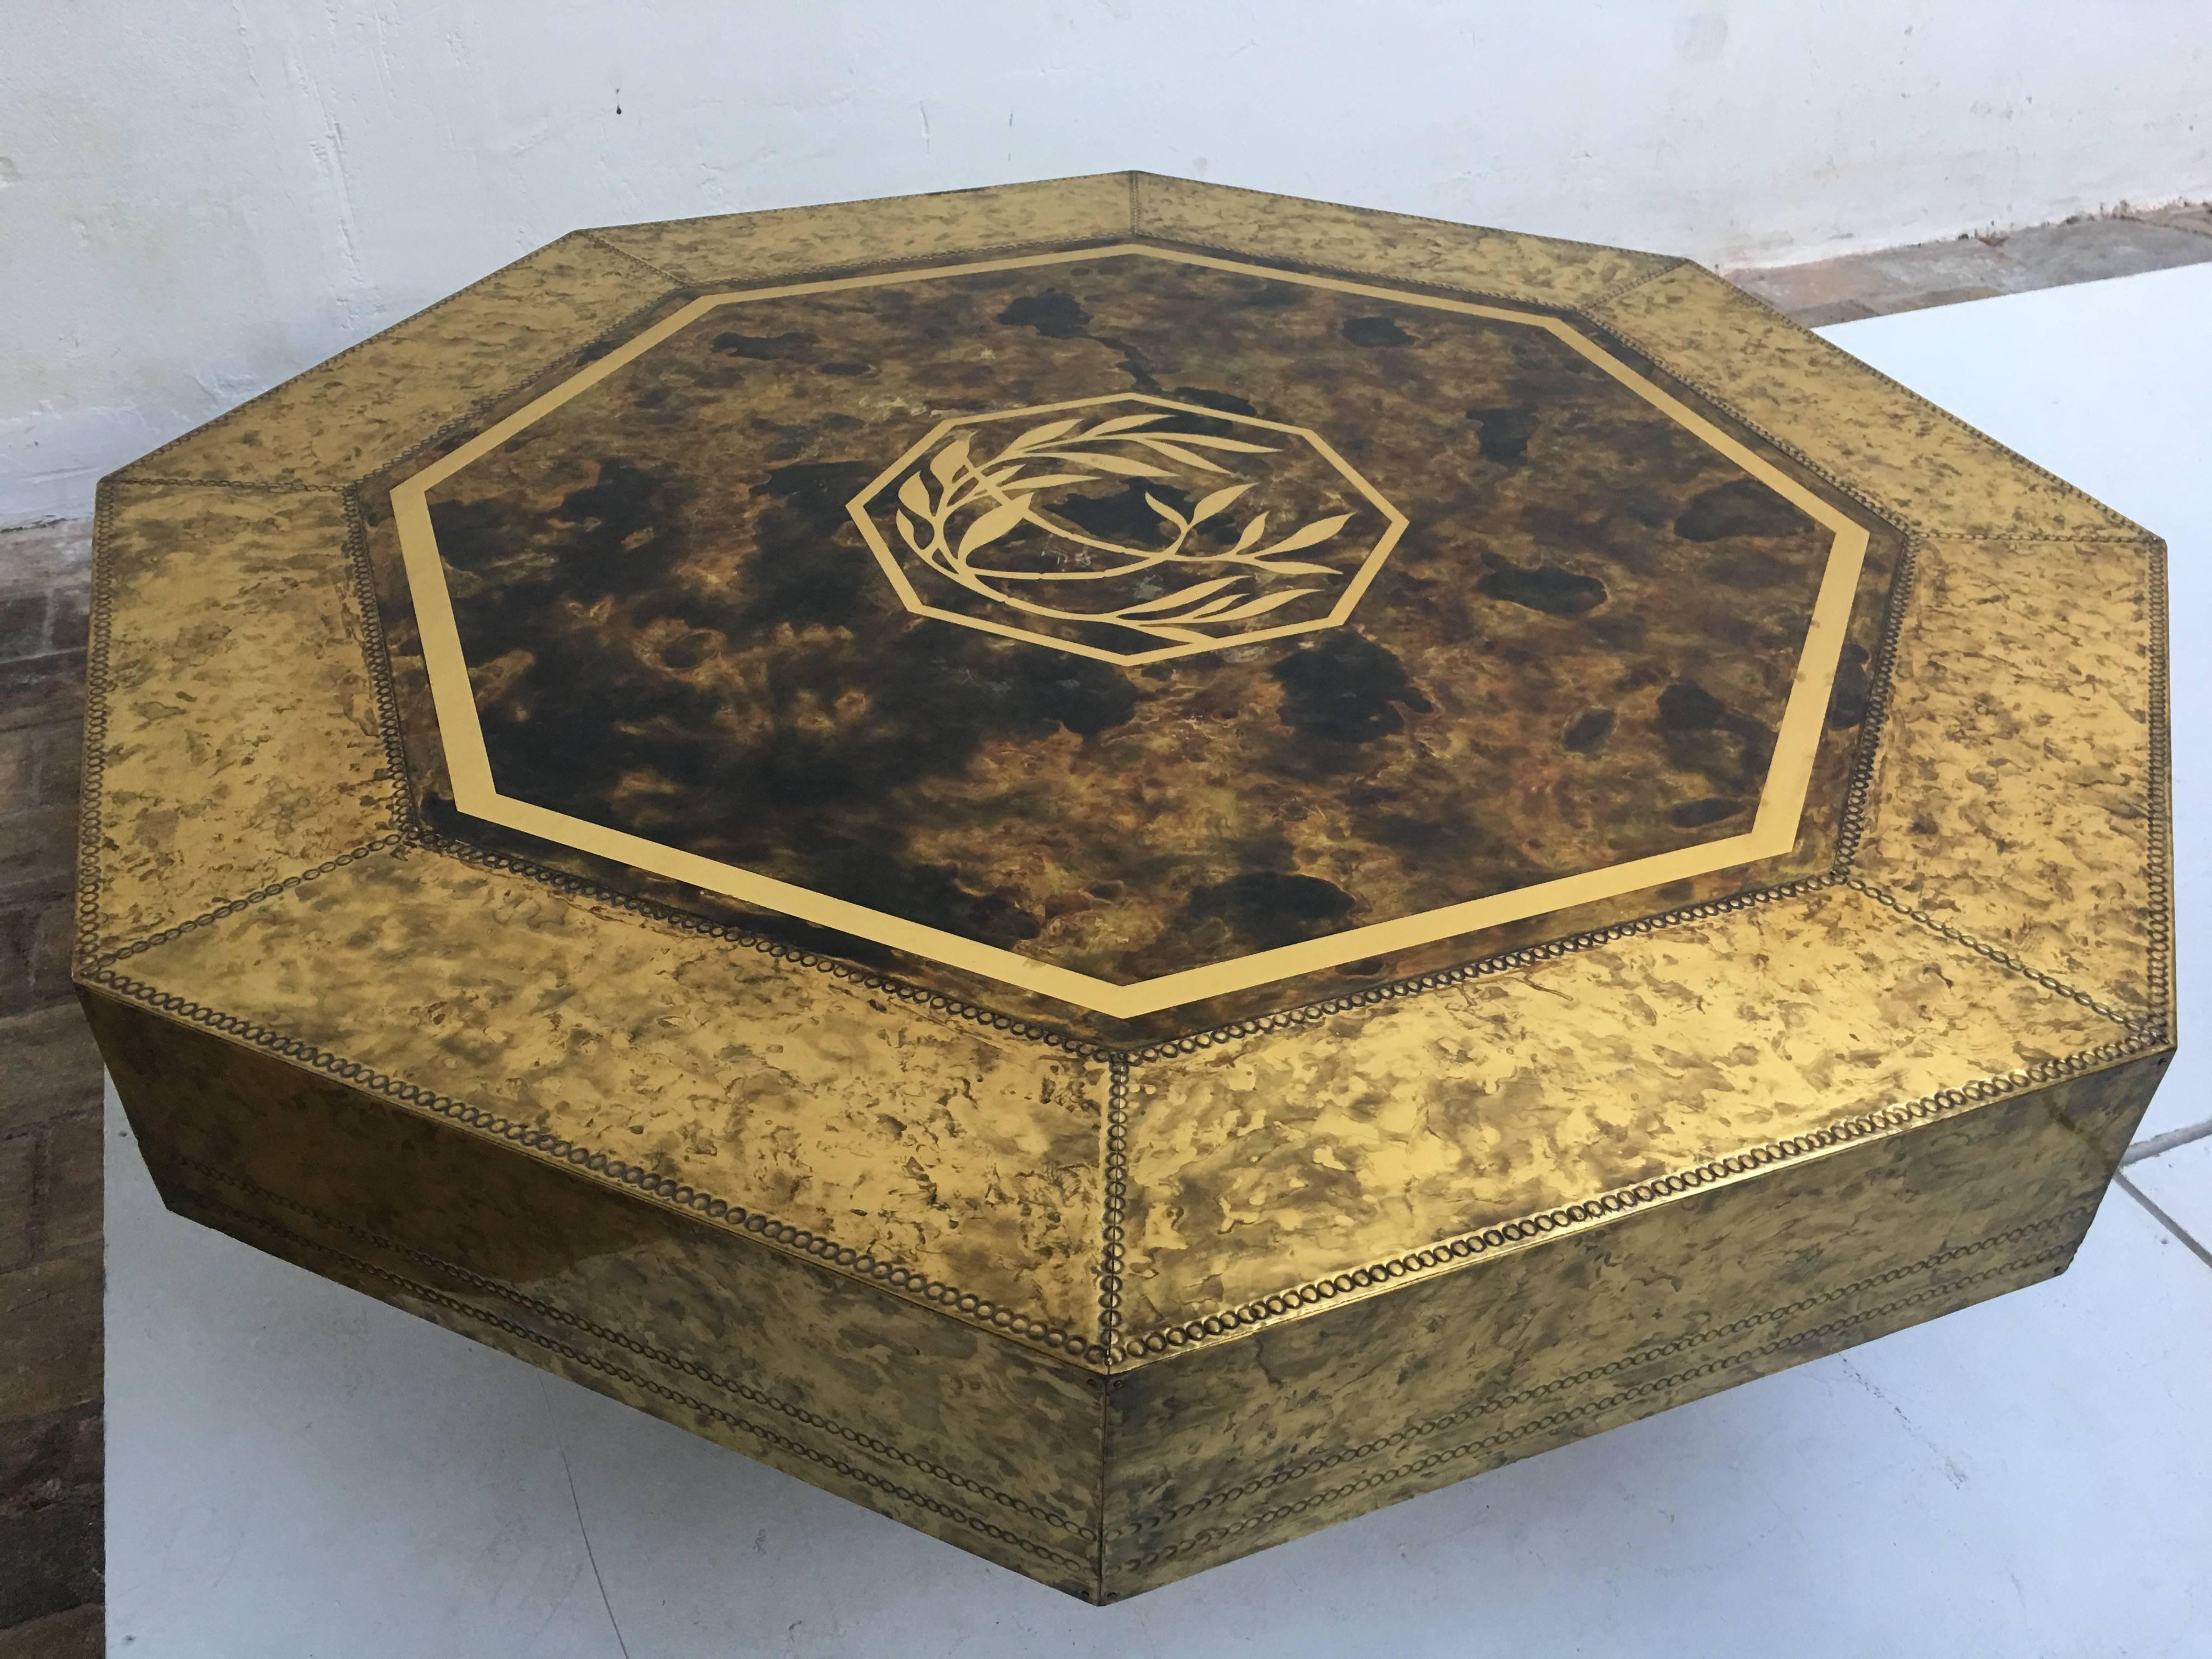 American Stunning 1970s 'Mastercraft', Acid Etched Brass Table by Sculptor Bernhard Rohne For Sale